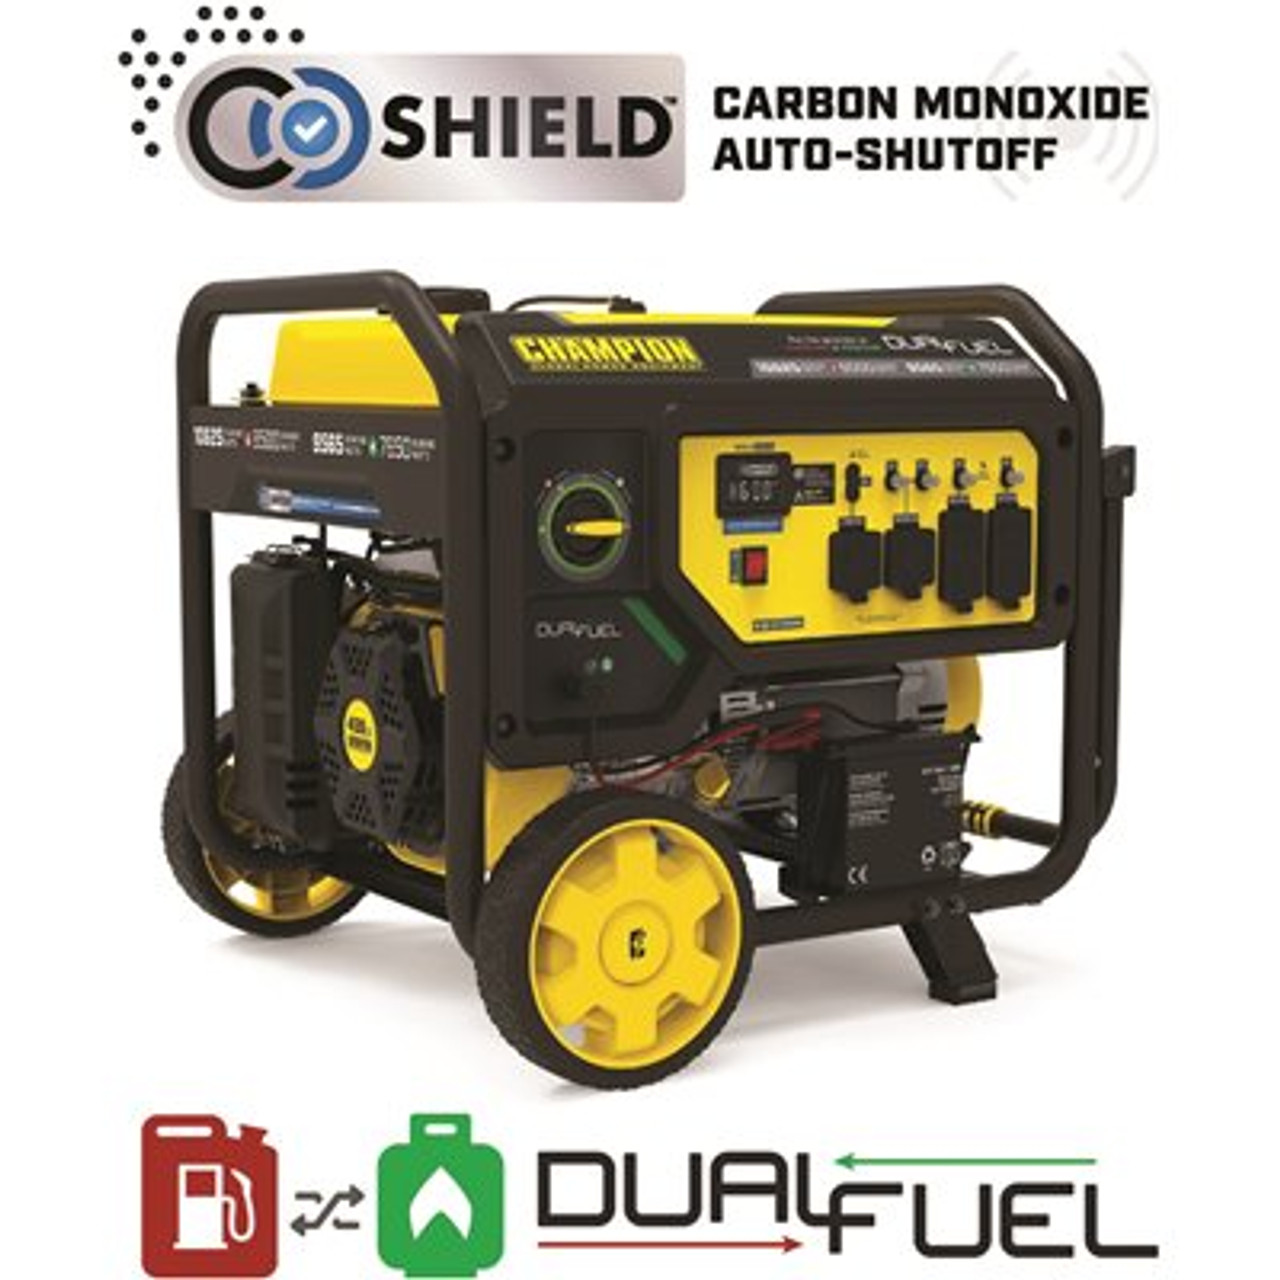 Champion Power Equipment 10,625/8500-Watt Electric Start Gas and Propane Dual Fuel Portable Generator with CO Shield